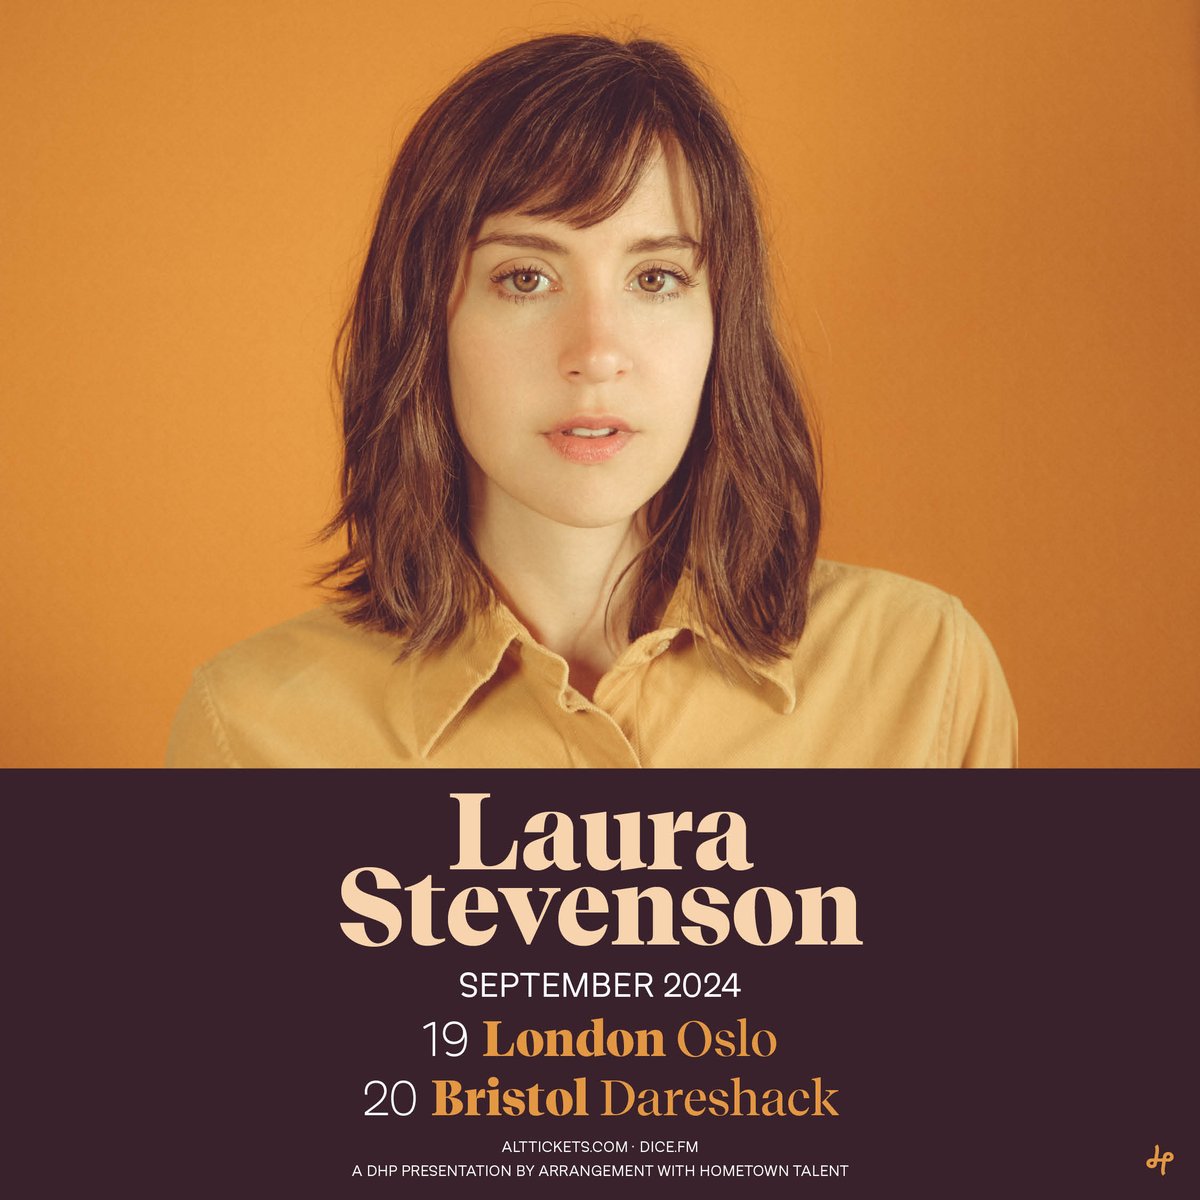 NEW/ Known for her introspective songwriting and melodic soundscapes, New York songwriter and performer Laura Stevenson is playing London's @OsloHackney and Bristol's @dareshack this September! Tickets are on sale now: tinyurl.com/2xttky6v